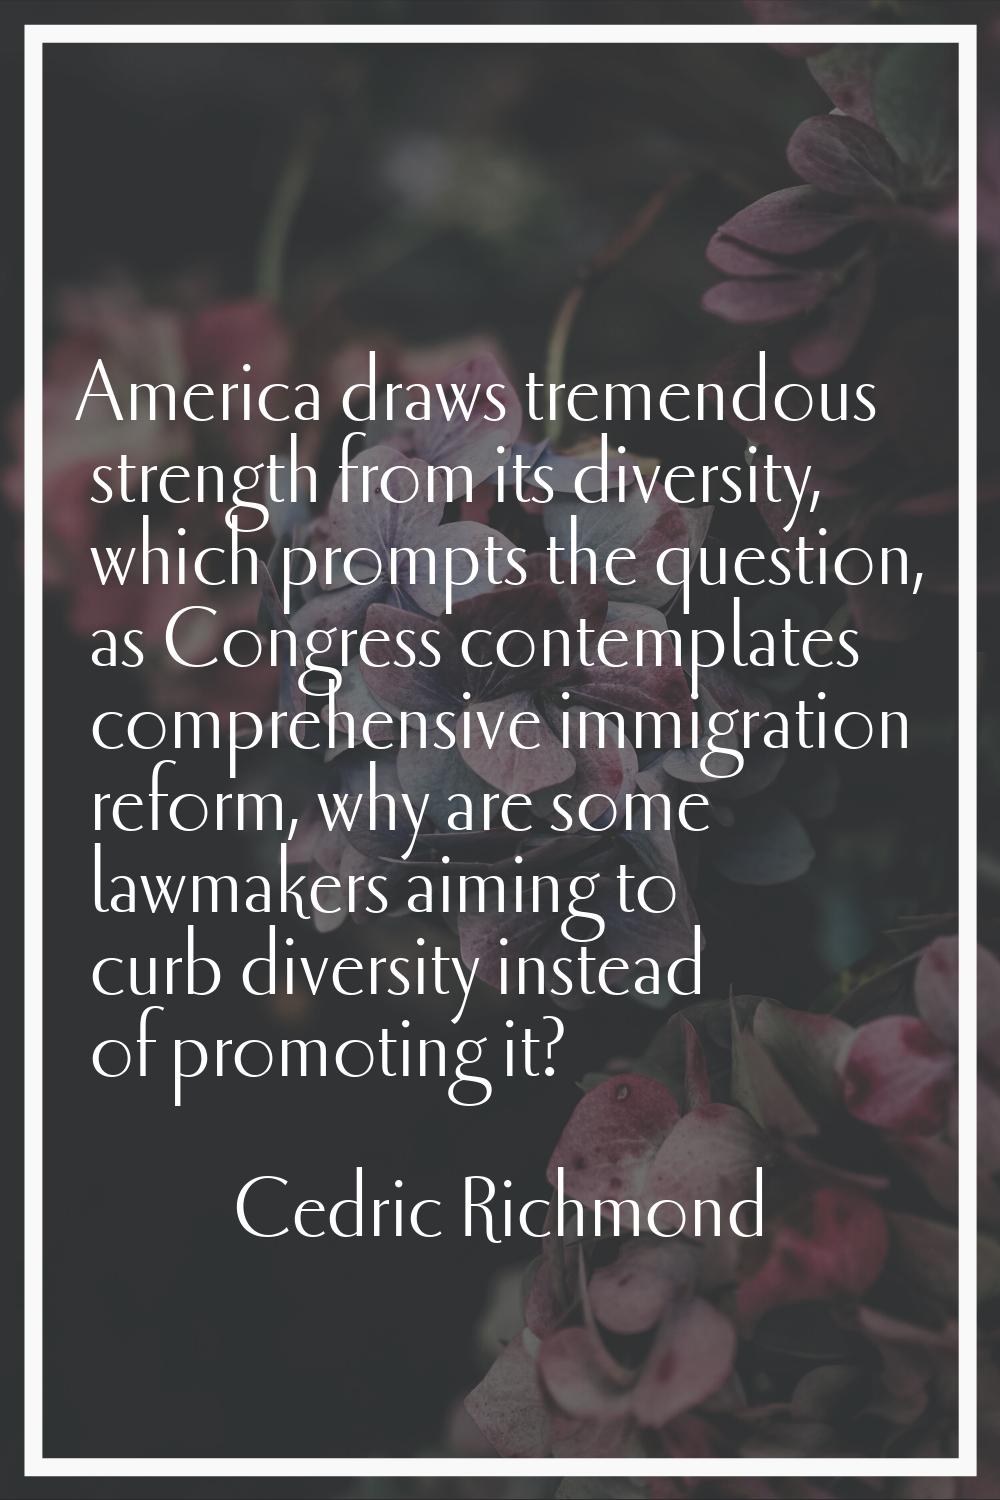 America draws tremendous strength from its diversity, which prompts the question, as Congress conte